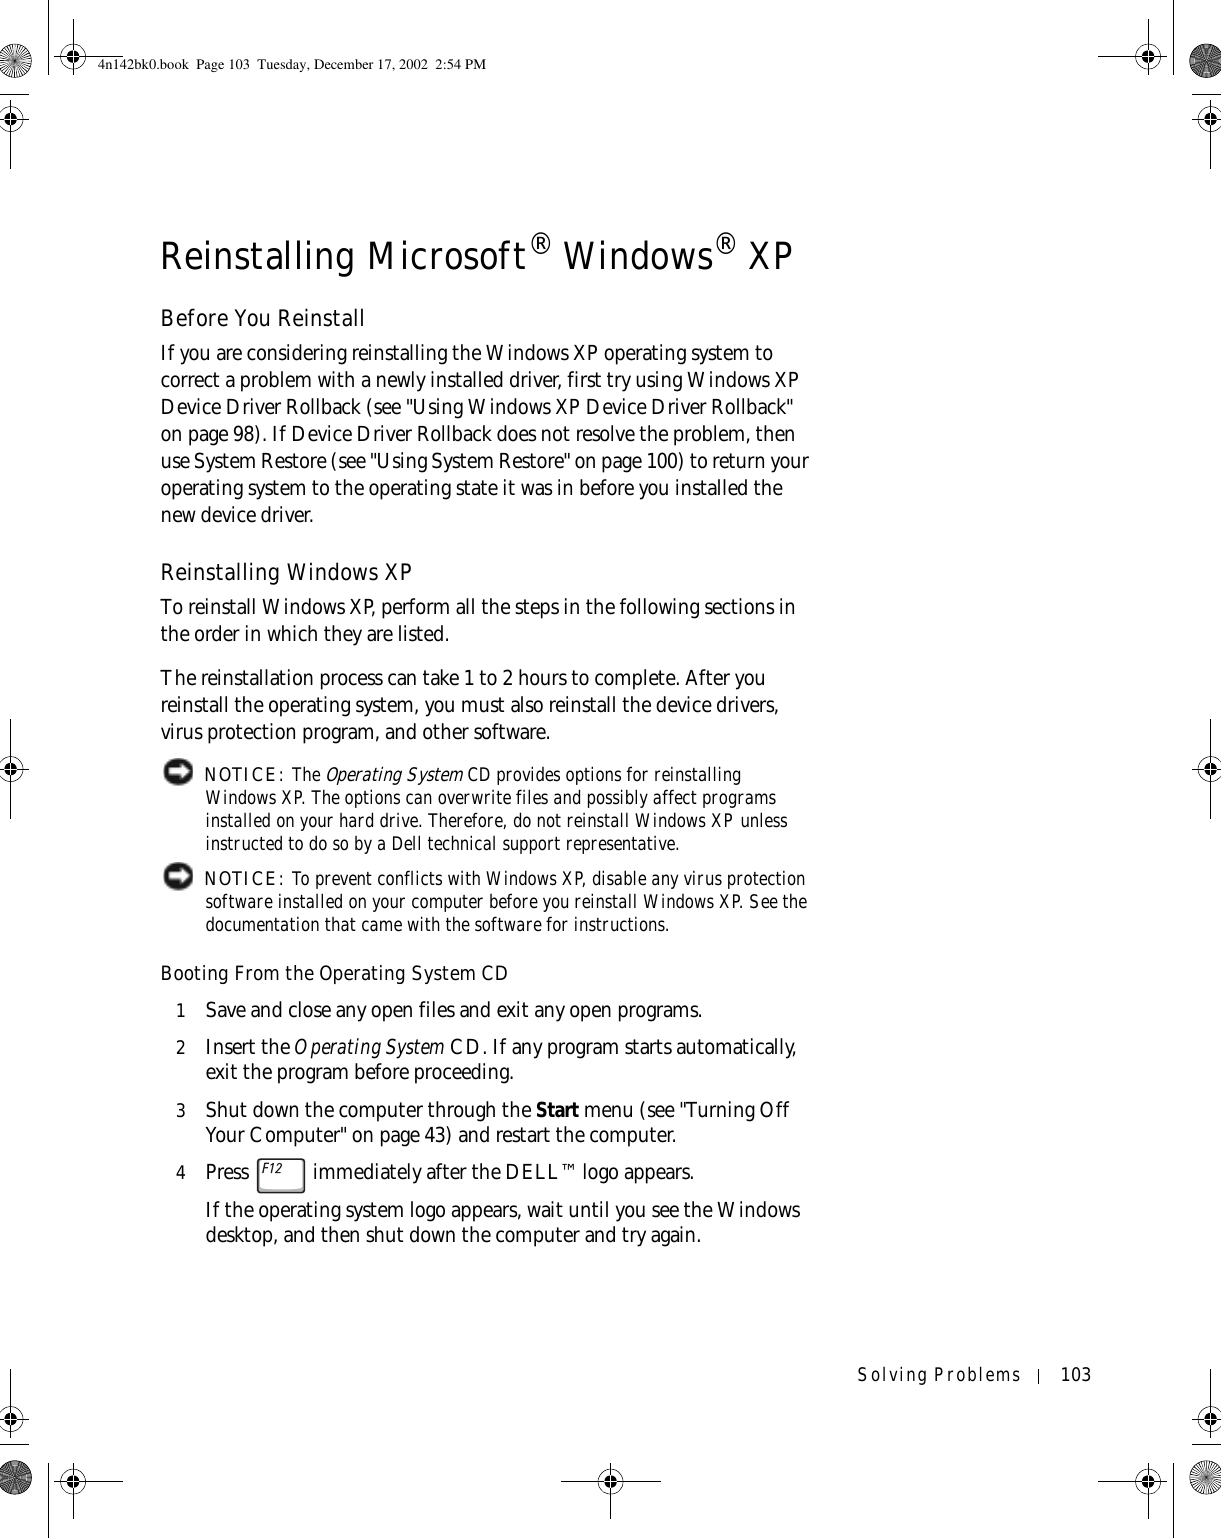 Solving Problems 103Reinstalling Microsoft® Windows® XPBefore You ReinstallIf you are considering reinstalling the Windows XP operating system to correct a problem with a newly installed driver, first try using Windows XP Device Driver Rollback (see &quot;Using Windows XP Device Driver Rollback&quot; on page 98). If Device Driver Rollback does not resolve the problem, then use System Restore (see &quot;Using System Restore&quot; on page 100) to return your operating system to the operating state it was in before you installed the new device driver.Reinstalling Windows XPTo reinstall Windows XP, perform all the steps in the following sections in the order in which they are listed.The reinstallation process can take 1 to 2 hours to complete. After you reinstall the operating system, you must also reinstall the device drivers, virus protection program, and other software. NOTICE: The Operating System CD provides options for reinstalling Windows XP. The options can overwrite files and possibly affect programs installed on your hard drive. Therefore, do not reinstall Windows XP unless instructed to do so by a Dell technical support representative. NOTICE: To prevent conflicts with Windows XP, disable any virus protection software installed on your computer before you reinstall Windows XP. See the documentation that came with the software for instructions.Booting From the Operating System CD1Save and close any open files and exit any open programs.2Insert the Operating System CD. If any program starts automatically, exit the program before proceeding.3Shut down the computer through the Start menu (see &quot;Turning Off Your Computer&quot; on page 43) and restart the computer.4Press   immediately after the DELL™ logo appears.If the operating system logo appears, wait until you see the Windows desktop, and then shut down the computer and try again.4n142bk0.book  Page 103  Tuesday, December 17, 2002  2:54 PM